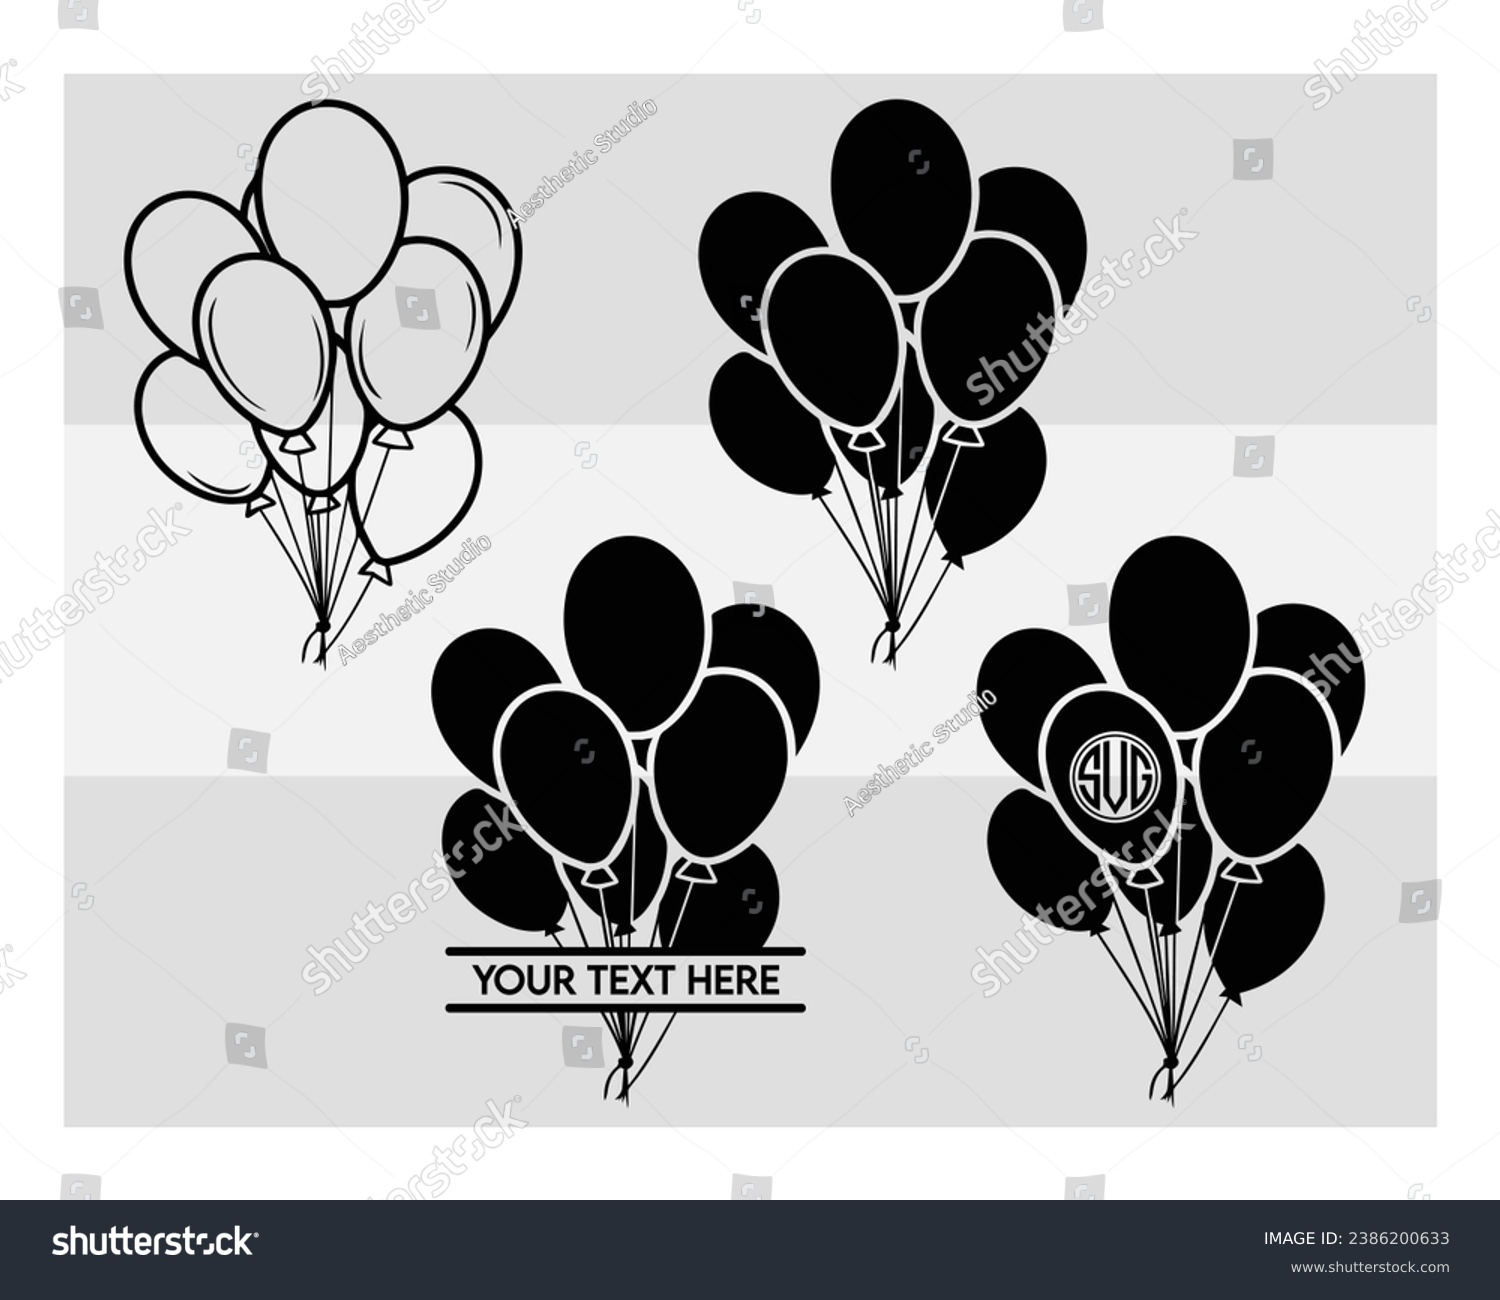 SVG of Balloons,  Balloons Silhouette, Happy Birthday, celebrate, celebration png, party, Balloon Vector, valentines day, Eps svg